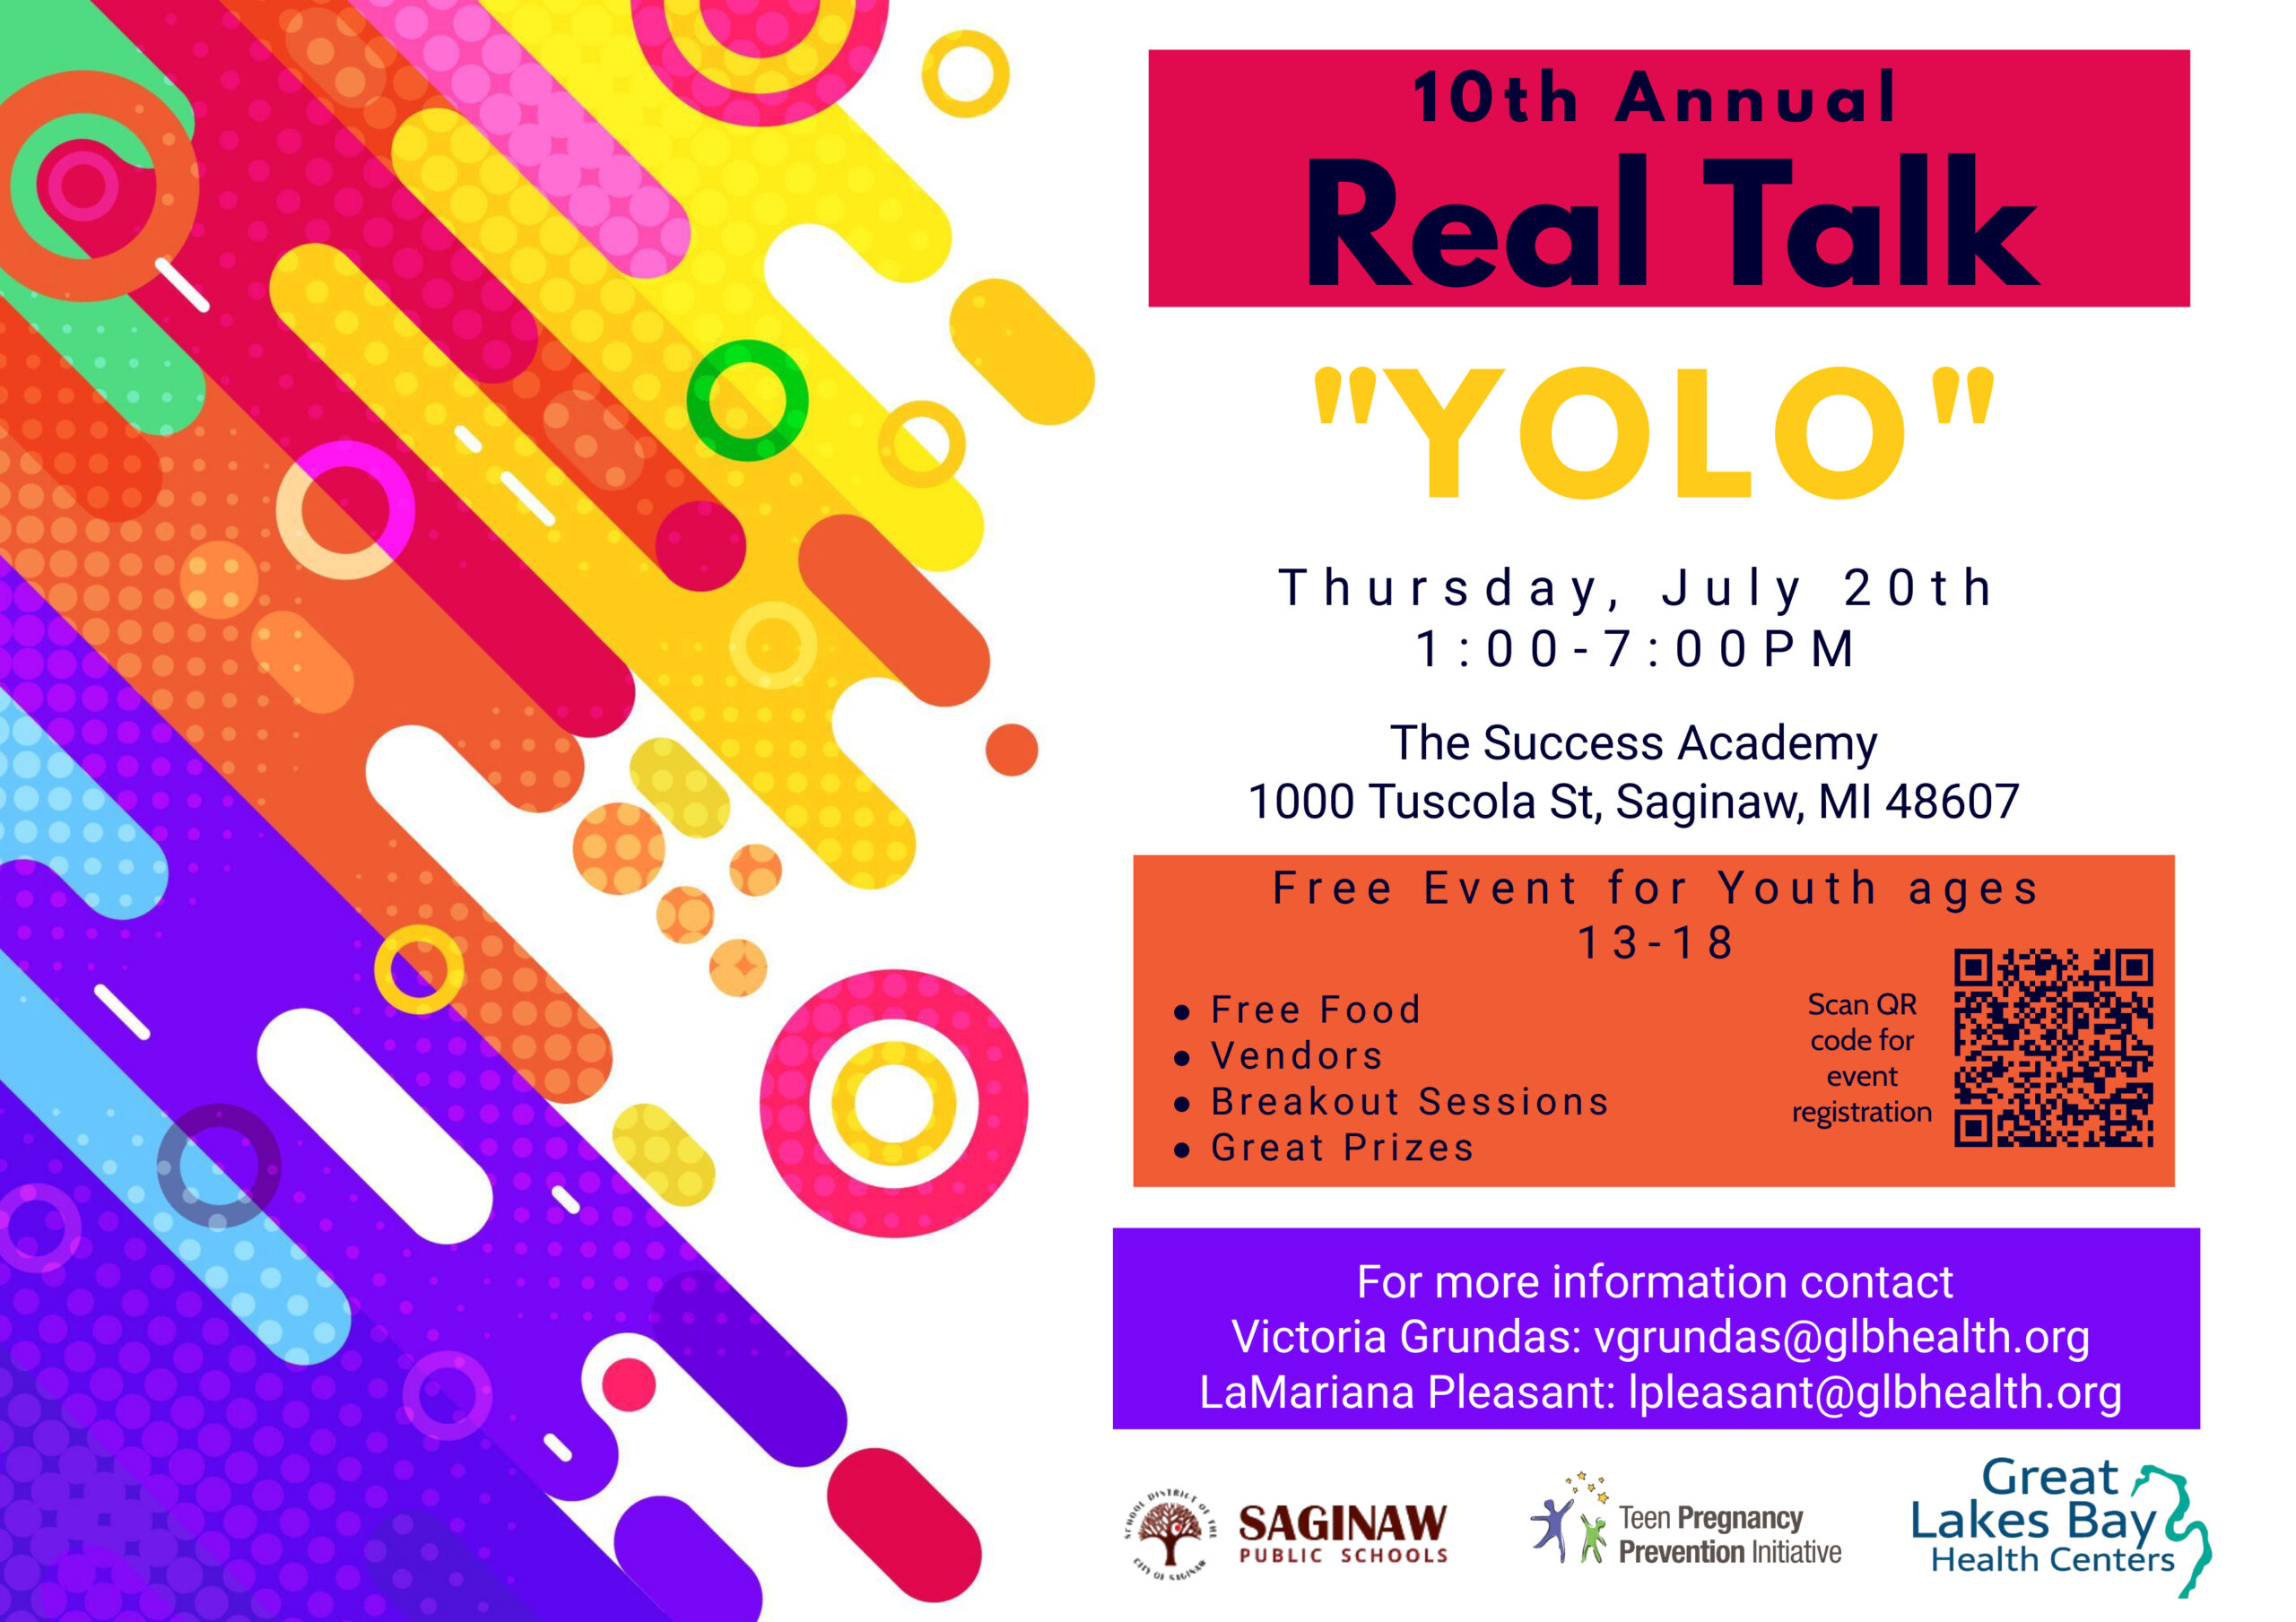 <h1 class="tribe-events-single-event-title">10th Annual Real Talk “YOLO”</h1>